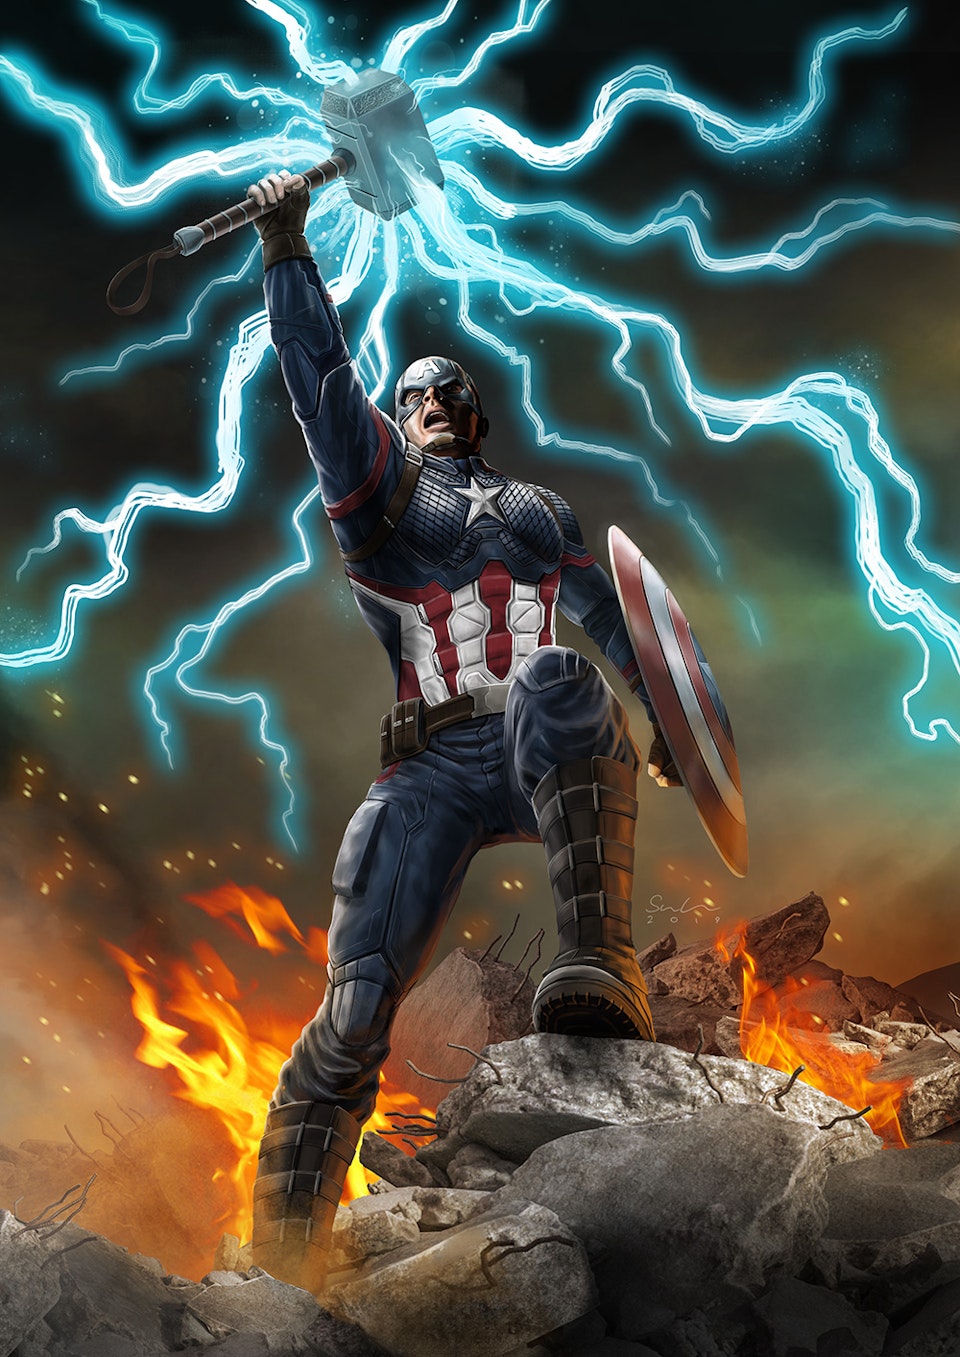 Captain America - Mjolnir - Captain America - Mjolnir 

Illustrated in Adobe Photoshop.

I actually painted this prior to the release of Avengers Endgame. The anticipation was running high and I wanted to visualise a moment that I really hoped would take place; Cap proving his worthiness - lifting Mjolnir and shouting "Avengers assemble!". I was delighted when I watched this dream scenario unfold on the big screen before me at the midnight release of the film.

An unfortunate drawback of this spot on prediction was a good deal of angry messages saying I'd spoiled a key moment in the film!